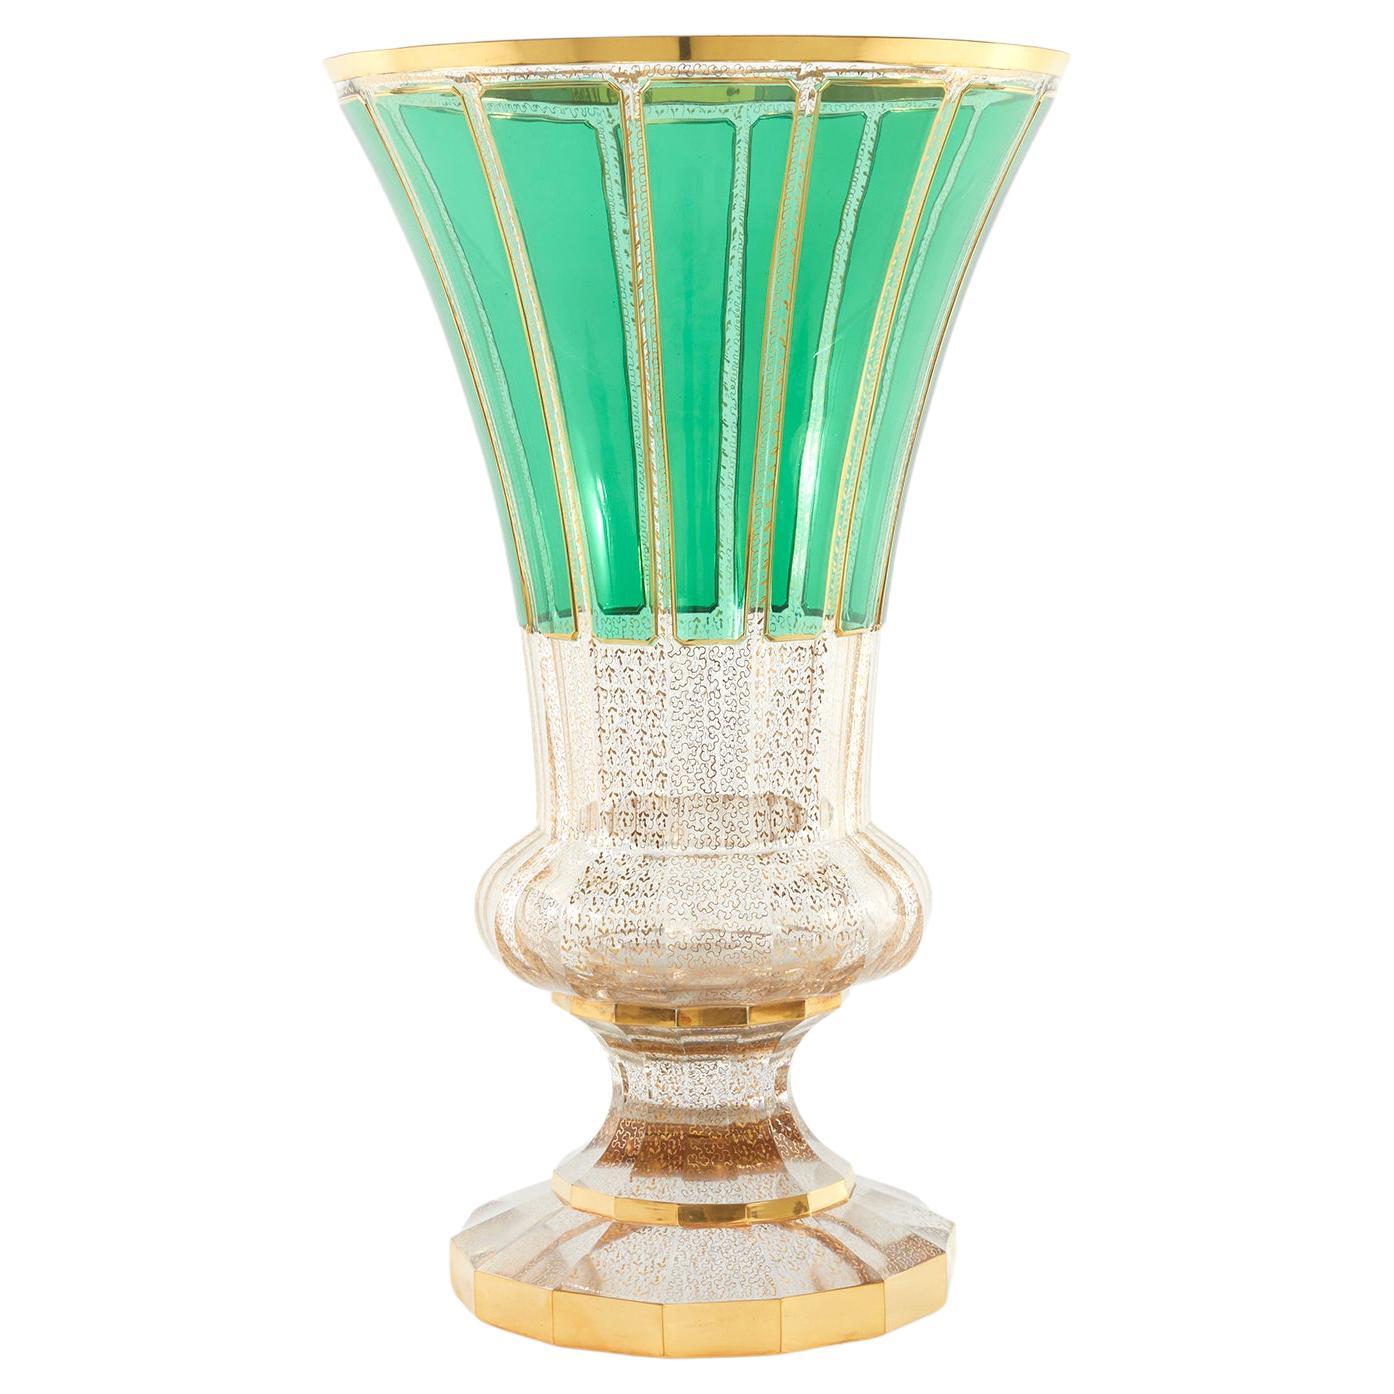 Very Large Moser Glass Decorative Vase Piece For Sale At 1stdibs